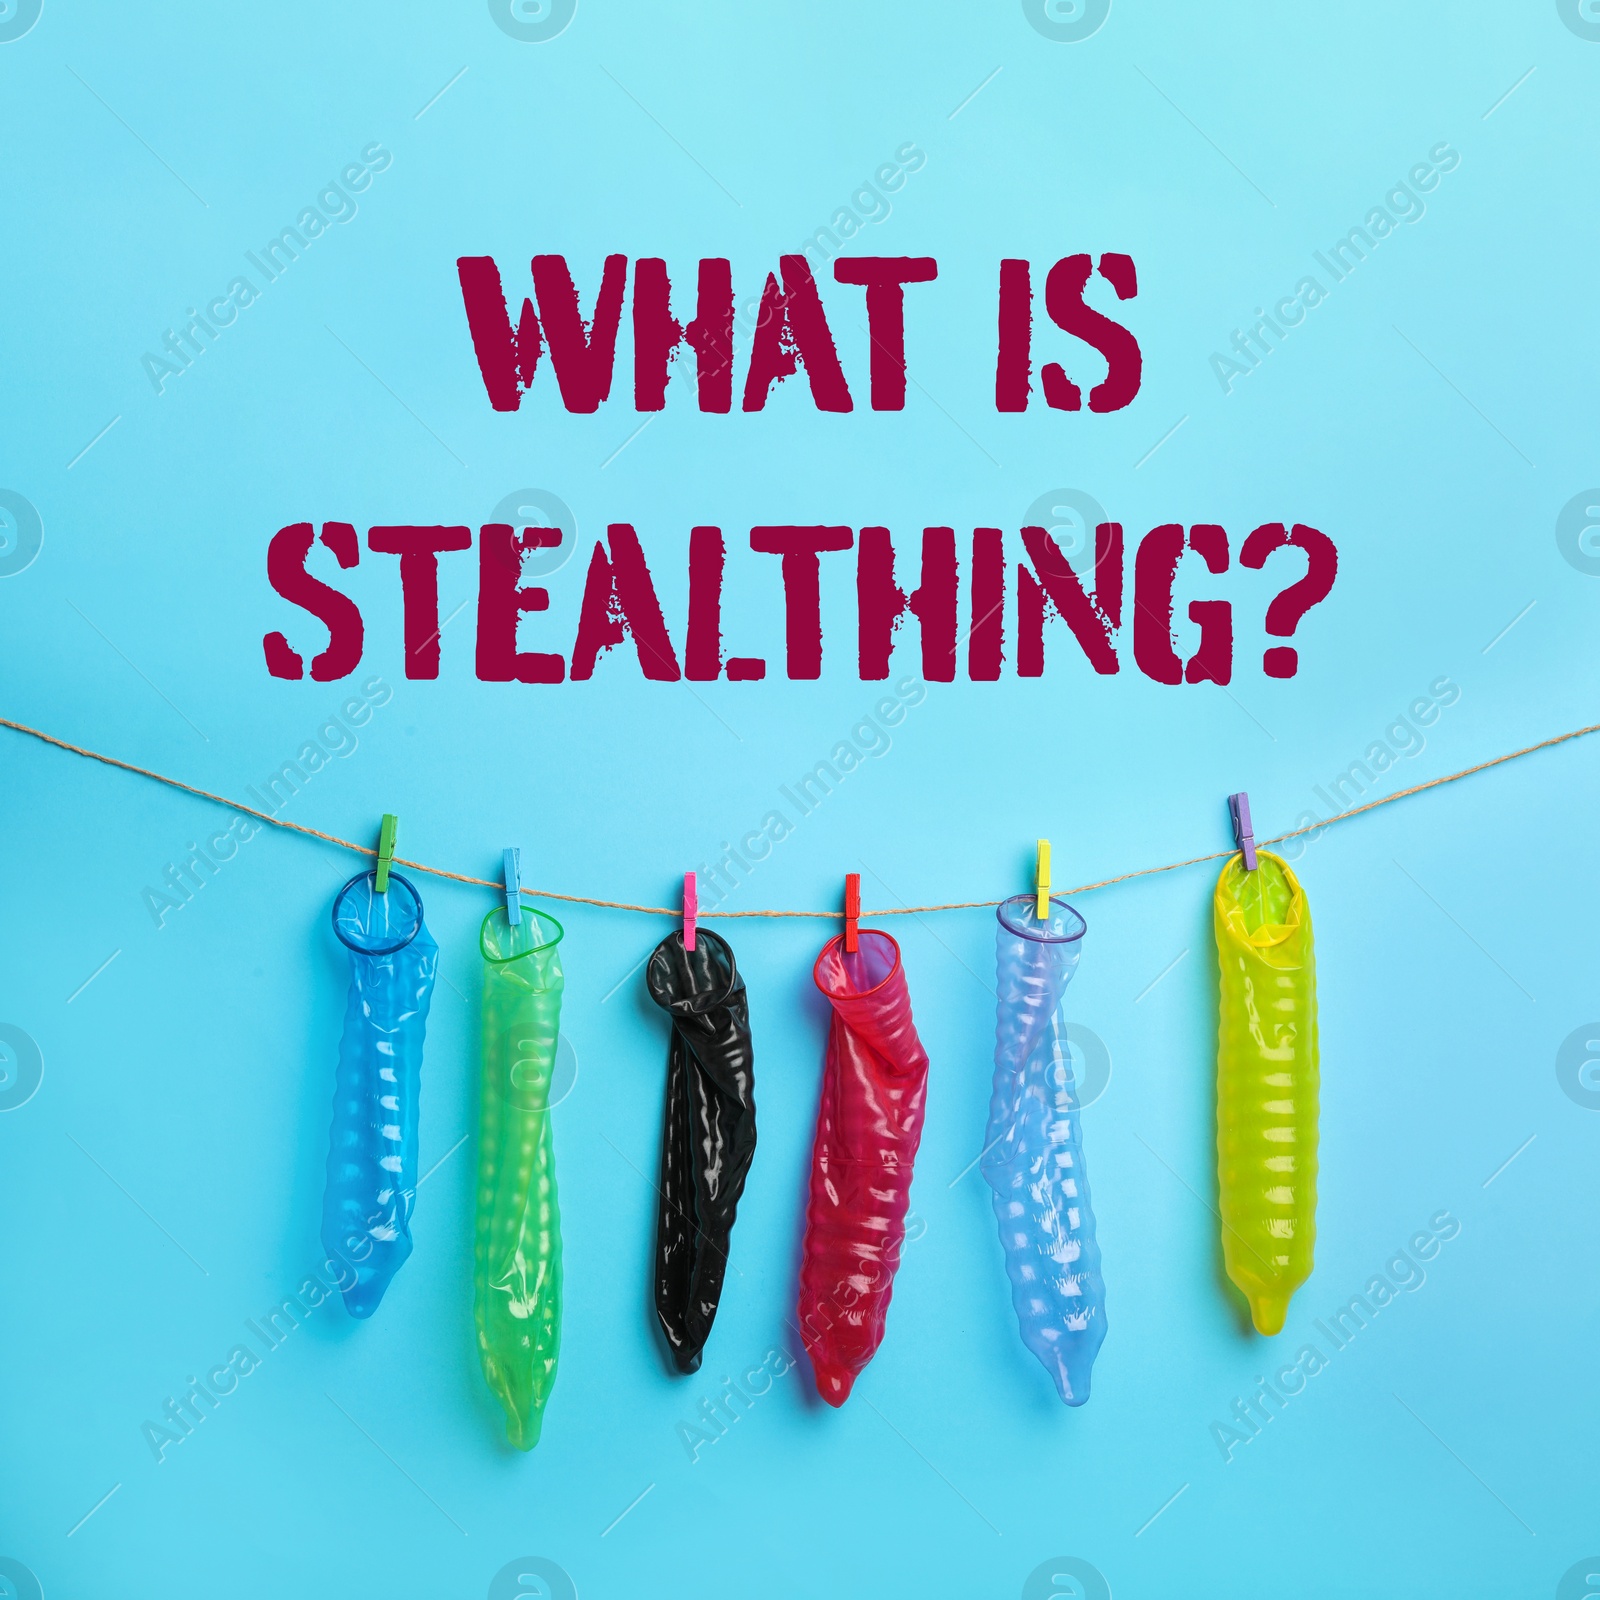 Image of What Is Stealthing? Used colorful condoms hanging on clothesline against light blue background